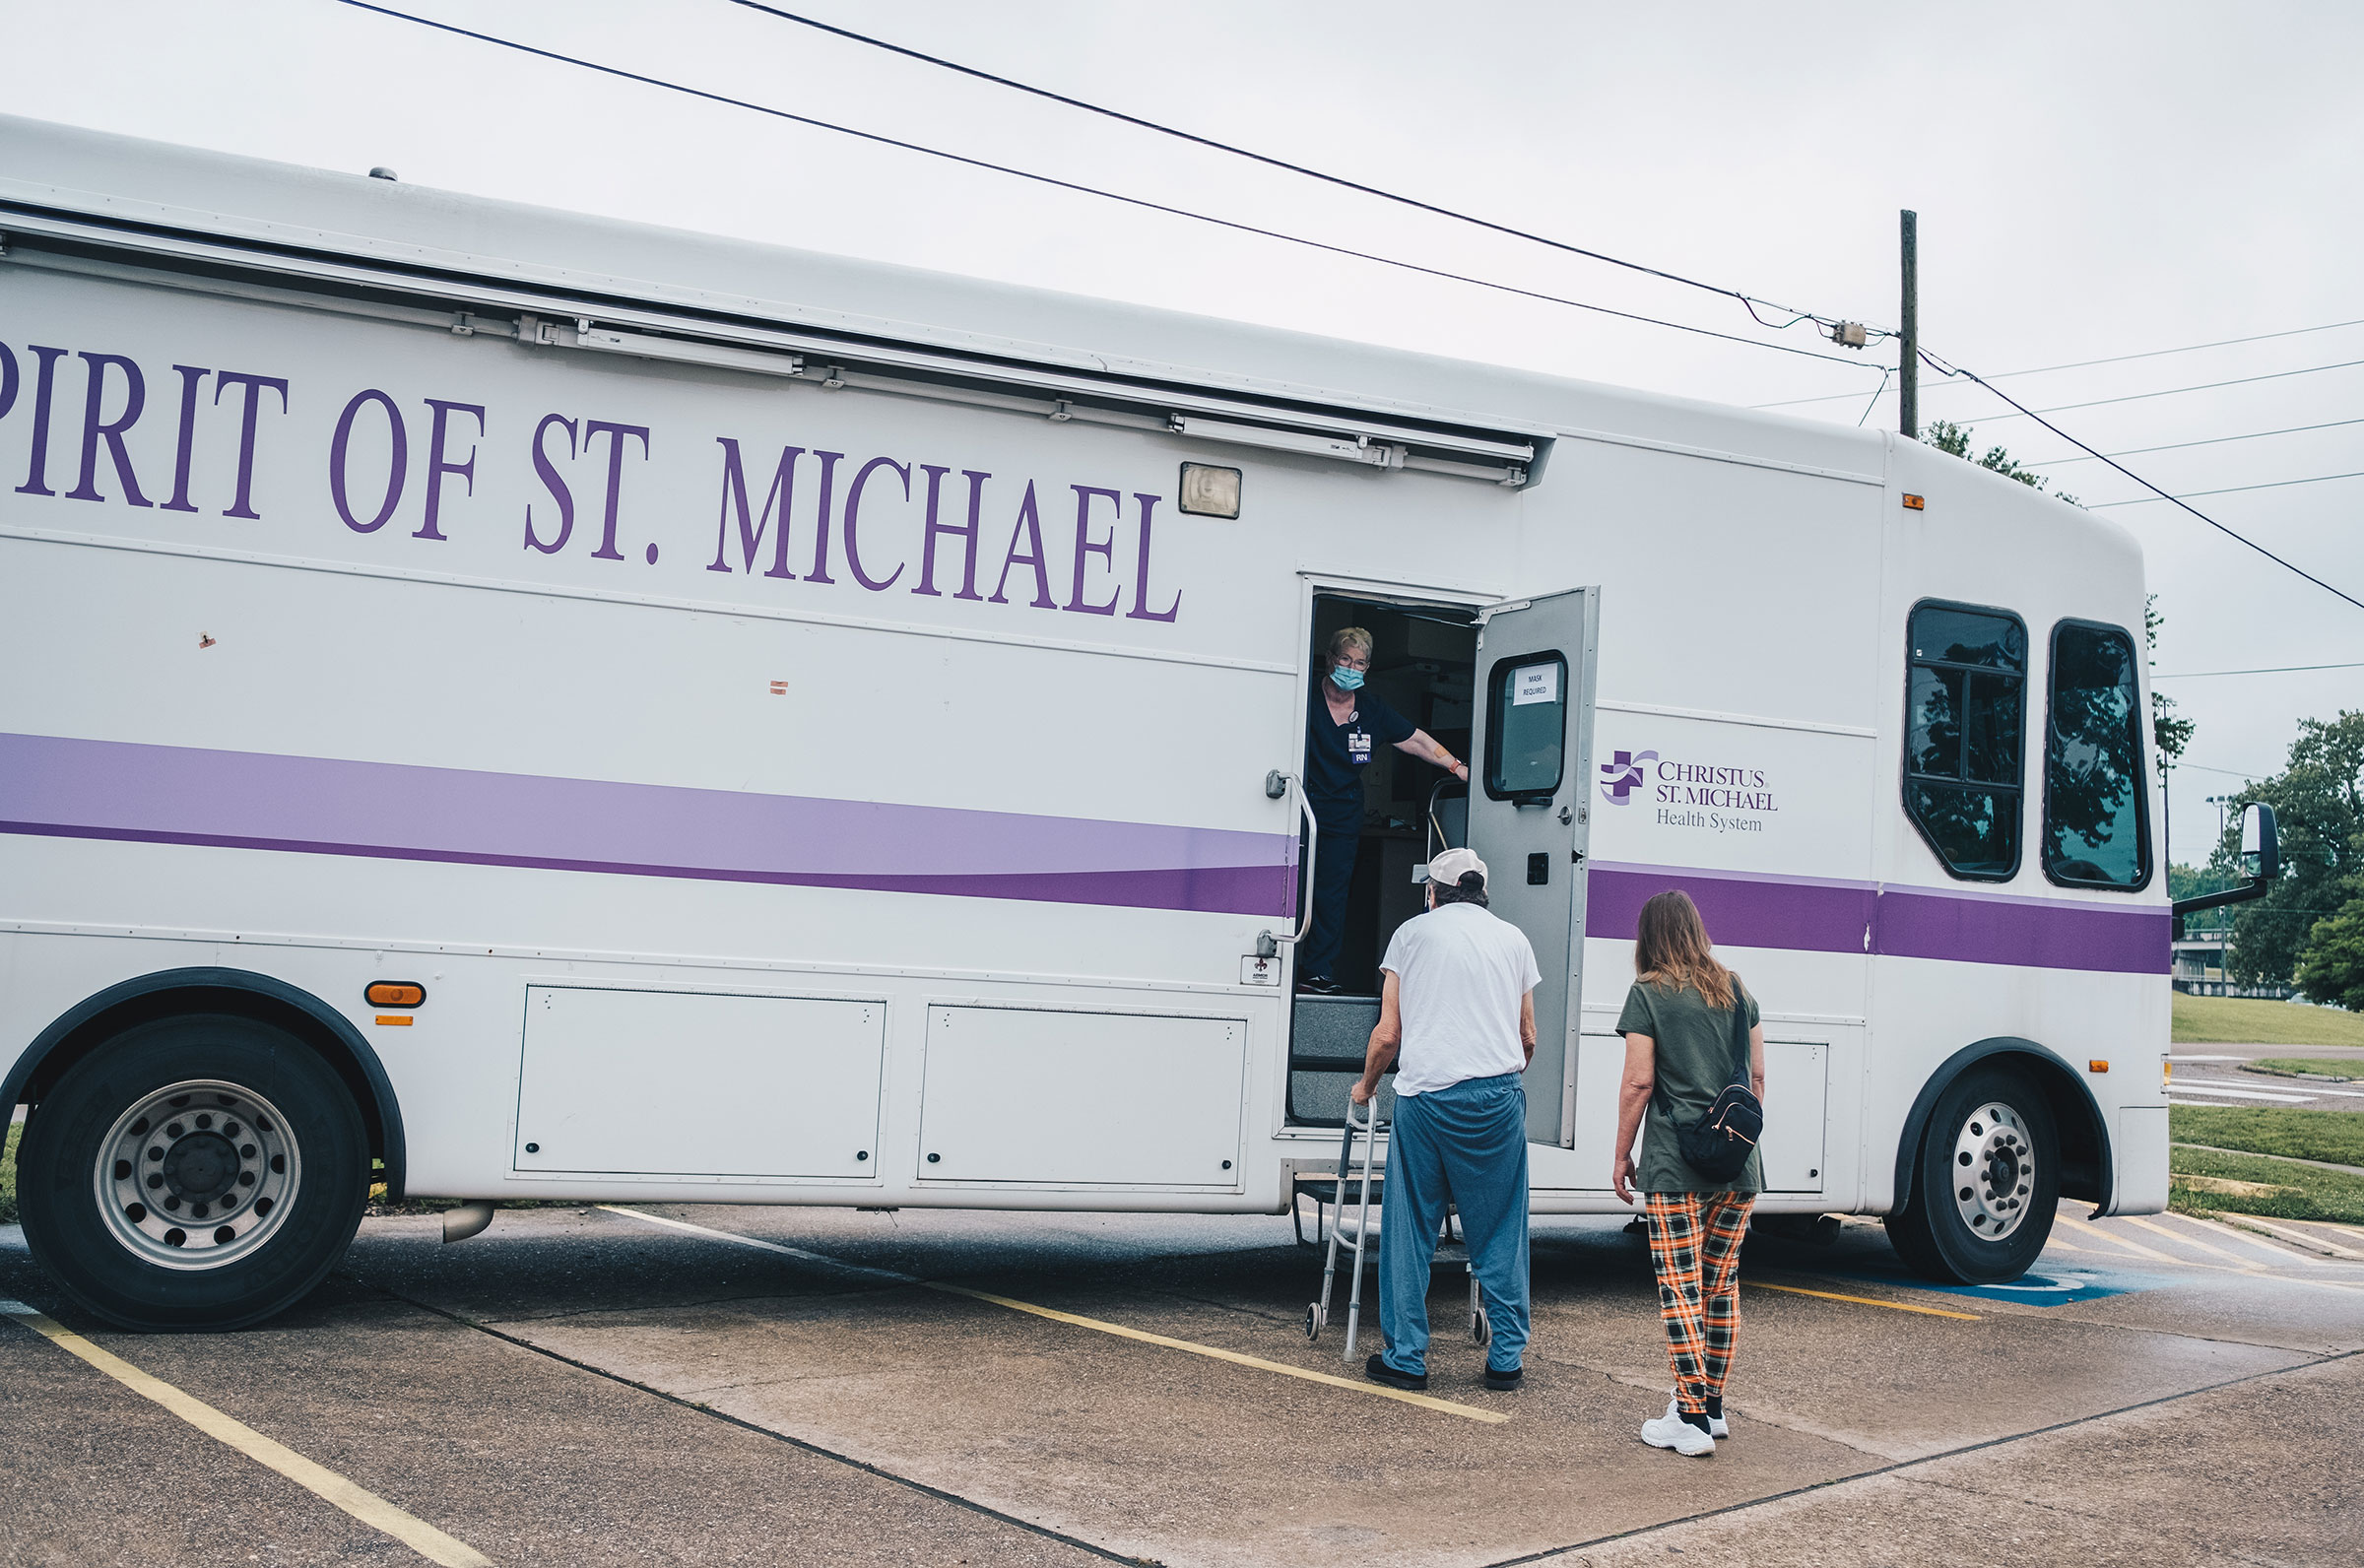 The Christus St. Michael mobile health unit gives out COVID-19 vaccines (Khadija Farah for TIME)